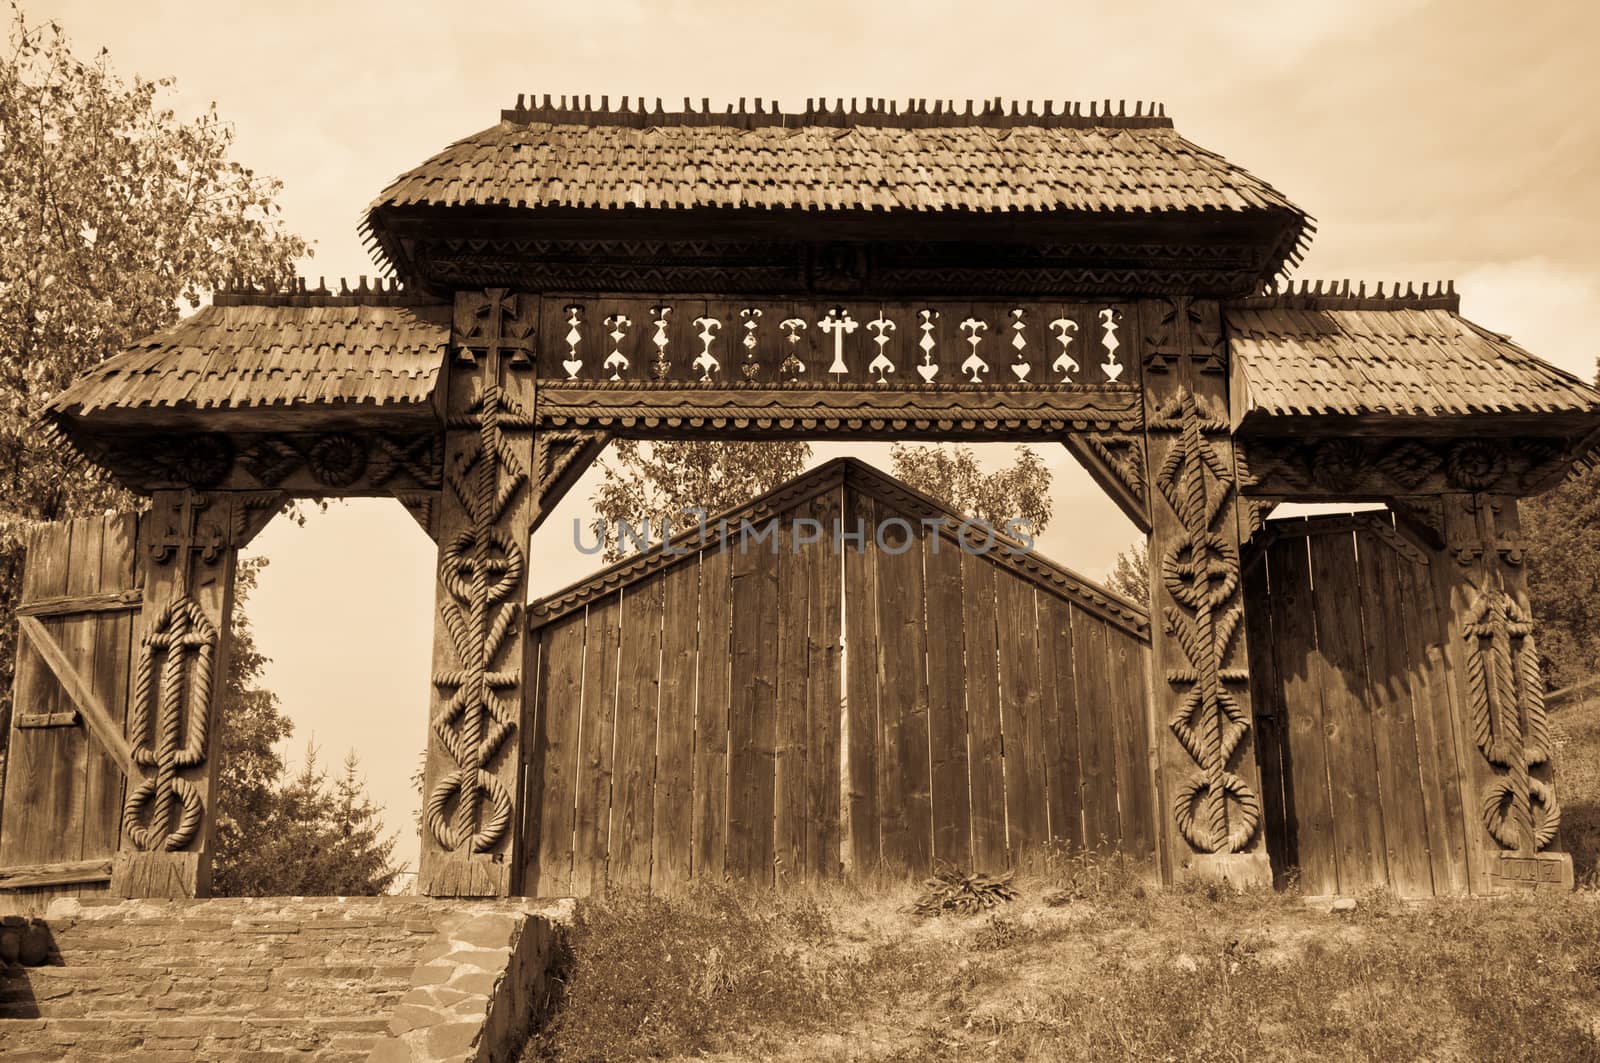 Traditional carved wooden gate from Maramures region, Romania, sepia tones.